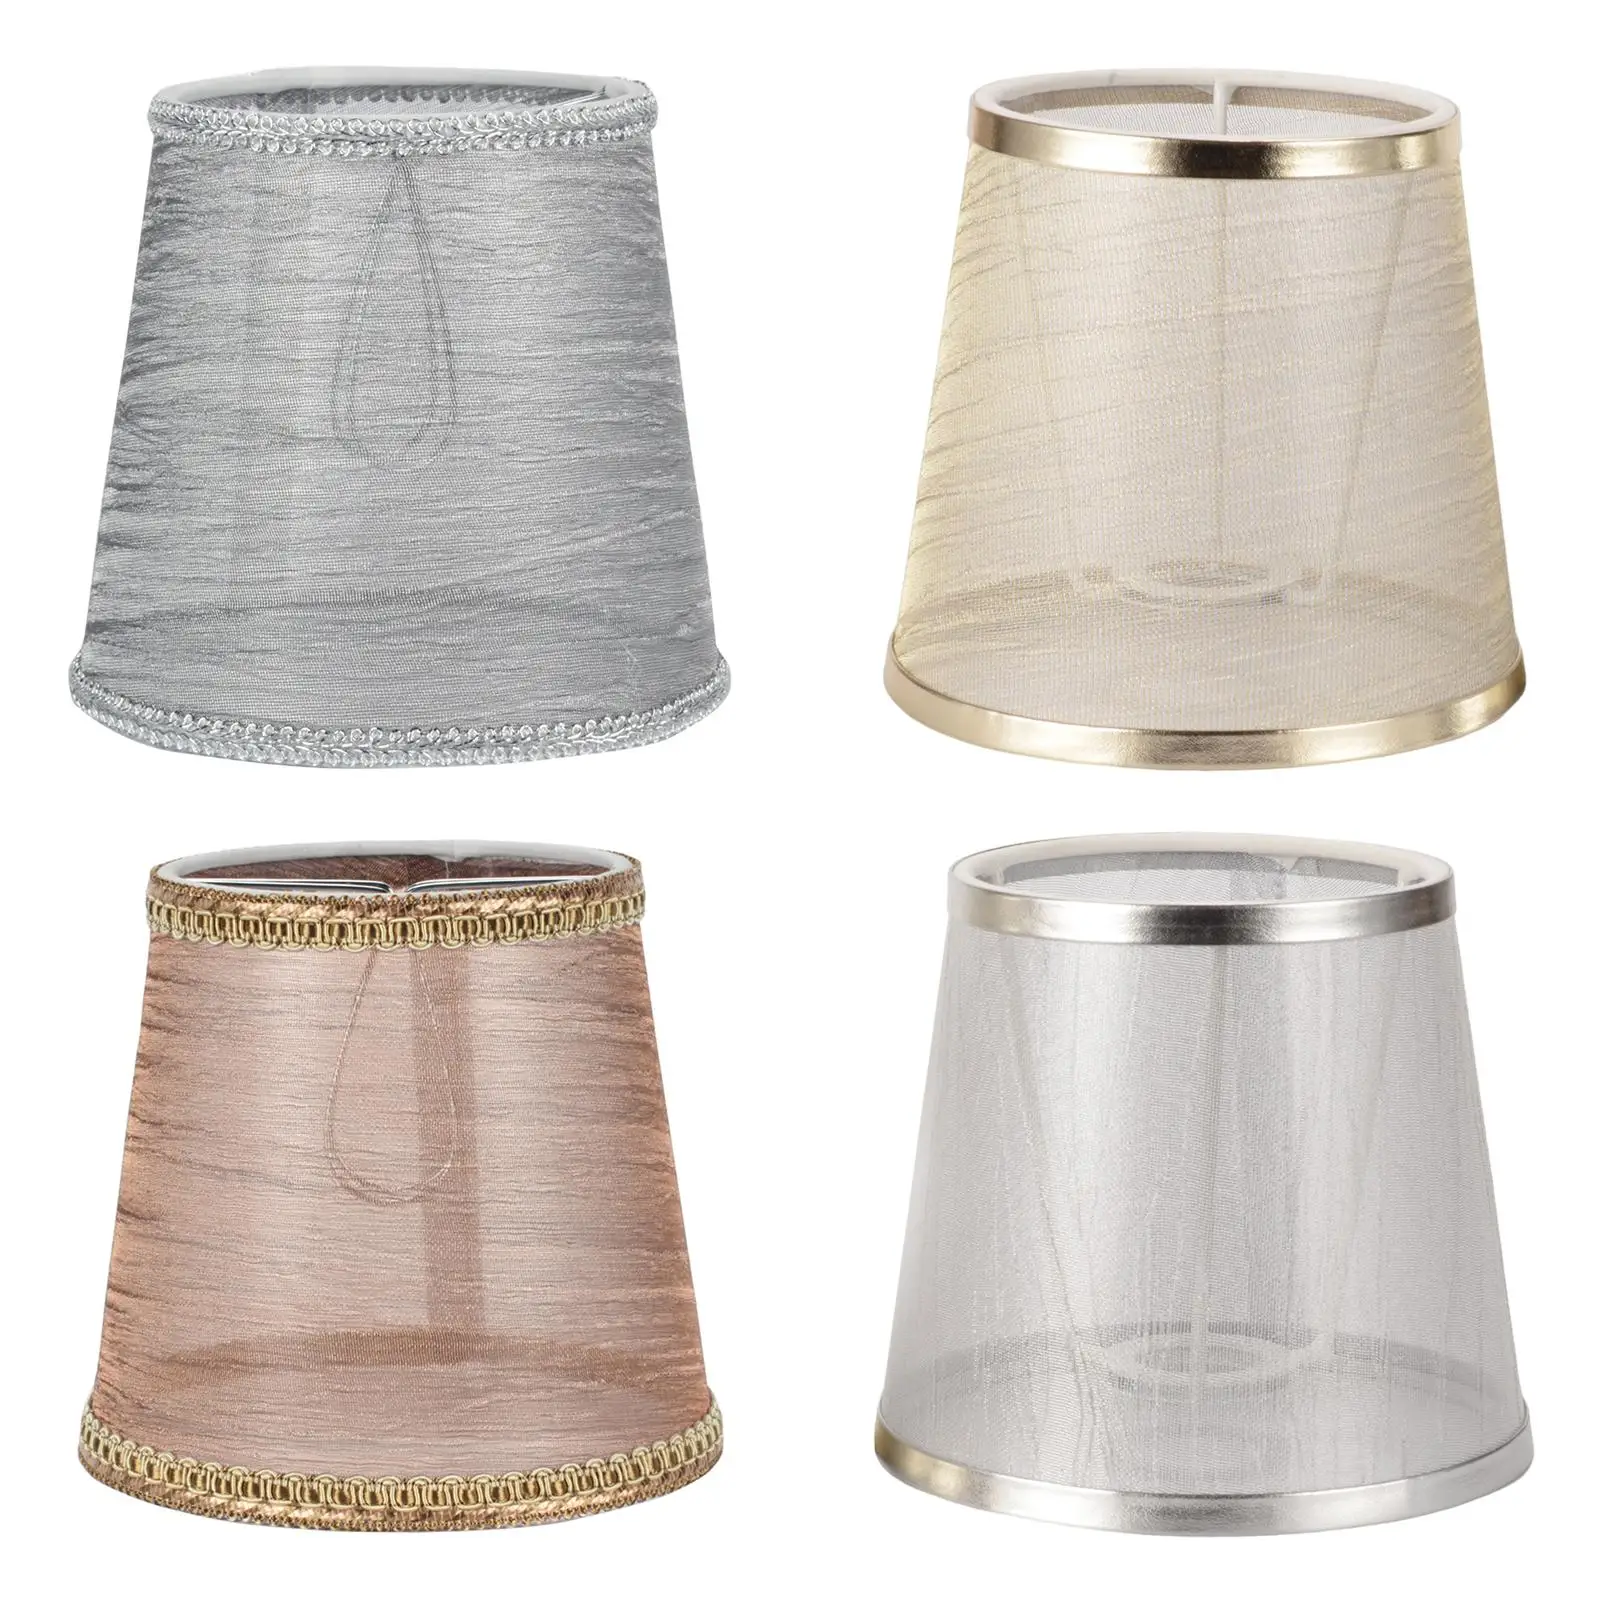 Modern Transparent Lamp Shade Durable Decorative Fabric Lampshade for Hotel Housewarming Wall Lamp Installation Chandelier Gift